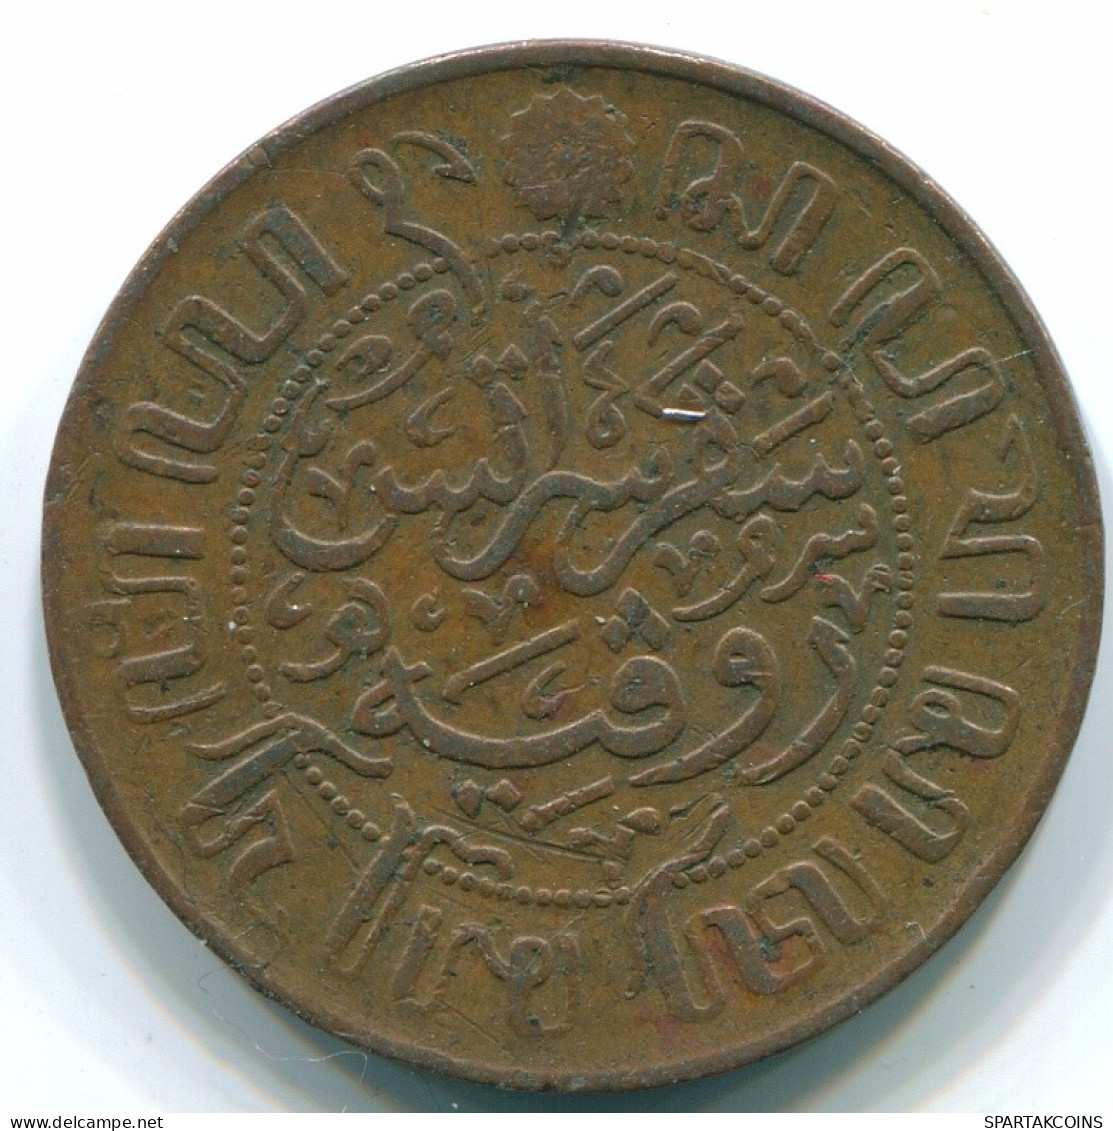 1 CENT 1929 NETHERLANDS EAST INDIES INDONESIA Copper Colonial Coin #S10103.U.A - Indes Neerlandesas